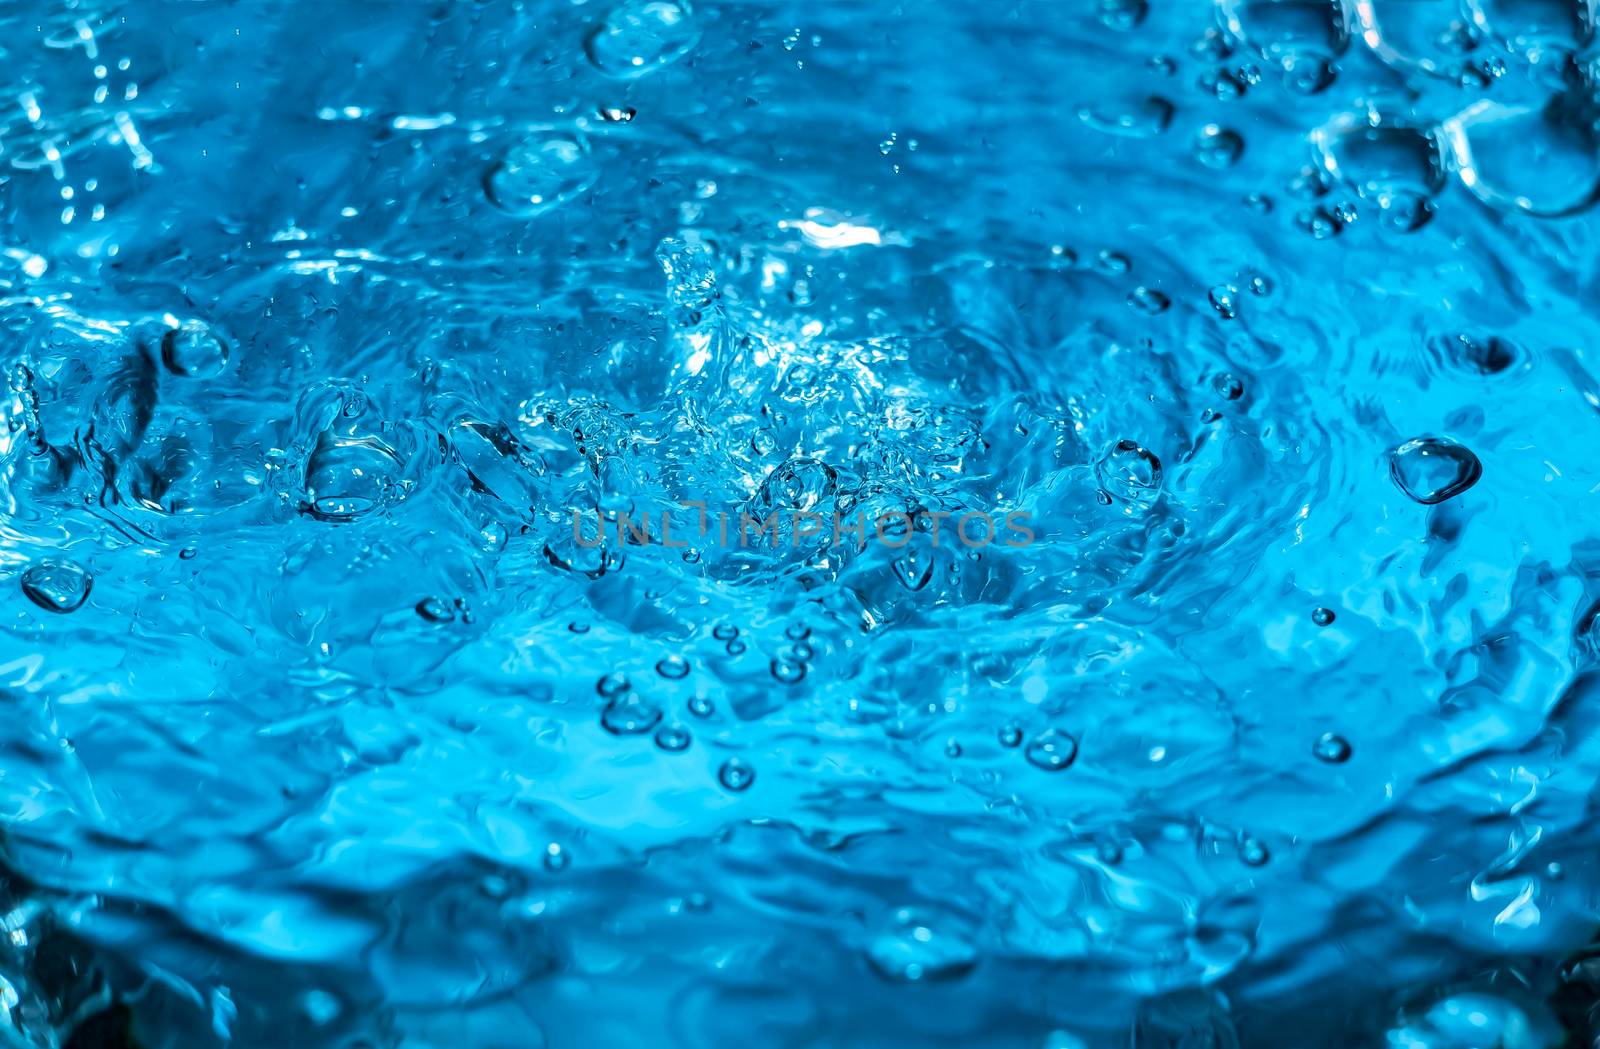 Water splash close-up. Drop of water. Blue water drop. Falling blue water surface with splash and air bubbles